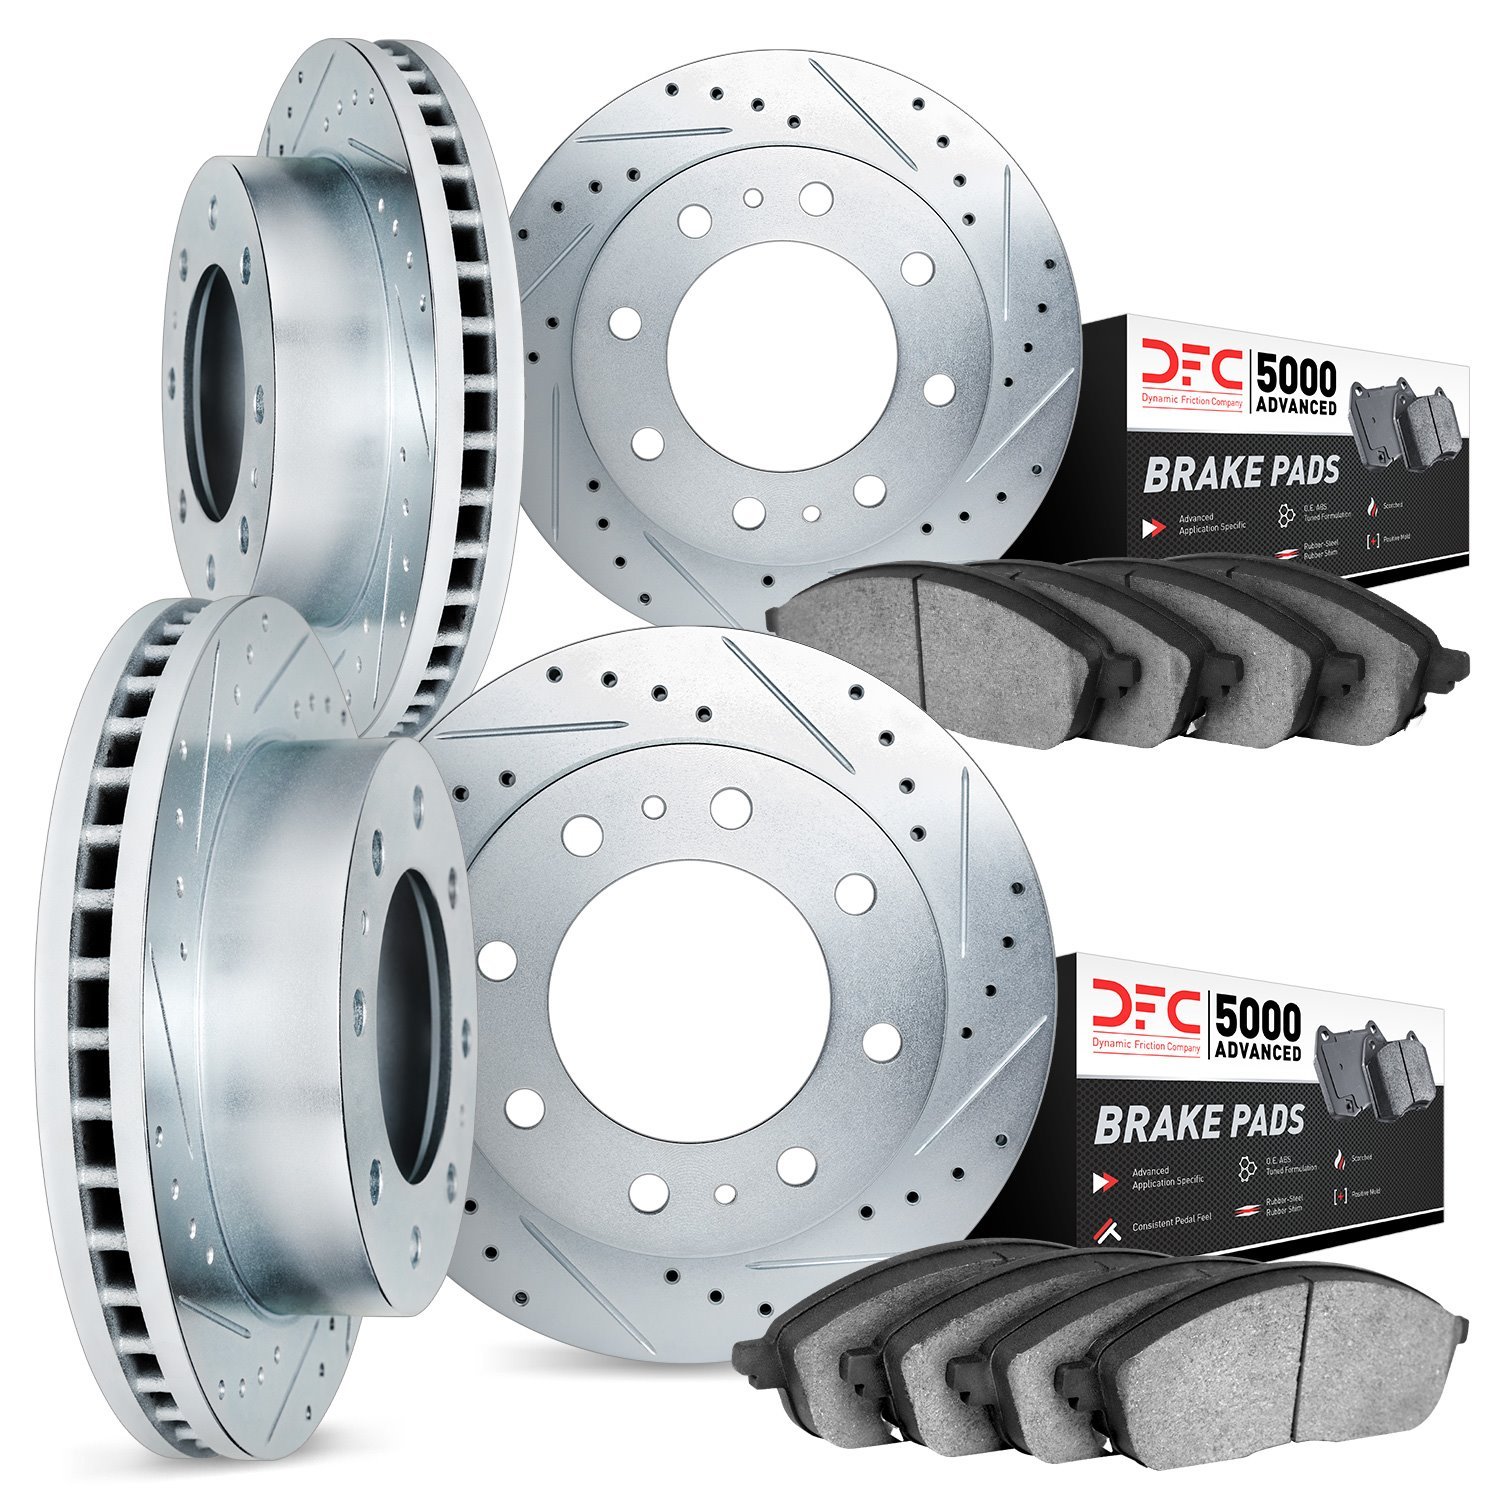 7504-48048 Drilled/Slotted Brake Rotors w/5000 Advanced Brake Pads Kit [Silver], 2011-2019 GM, Position: Front and Rear